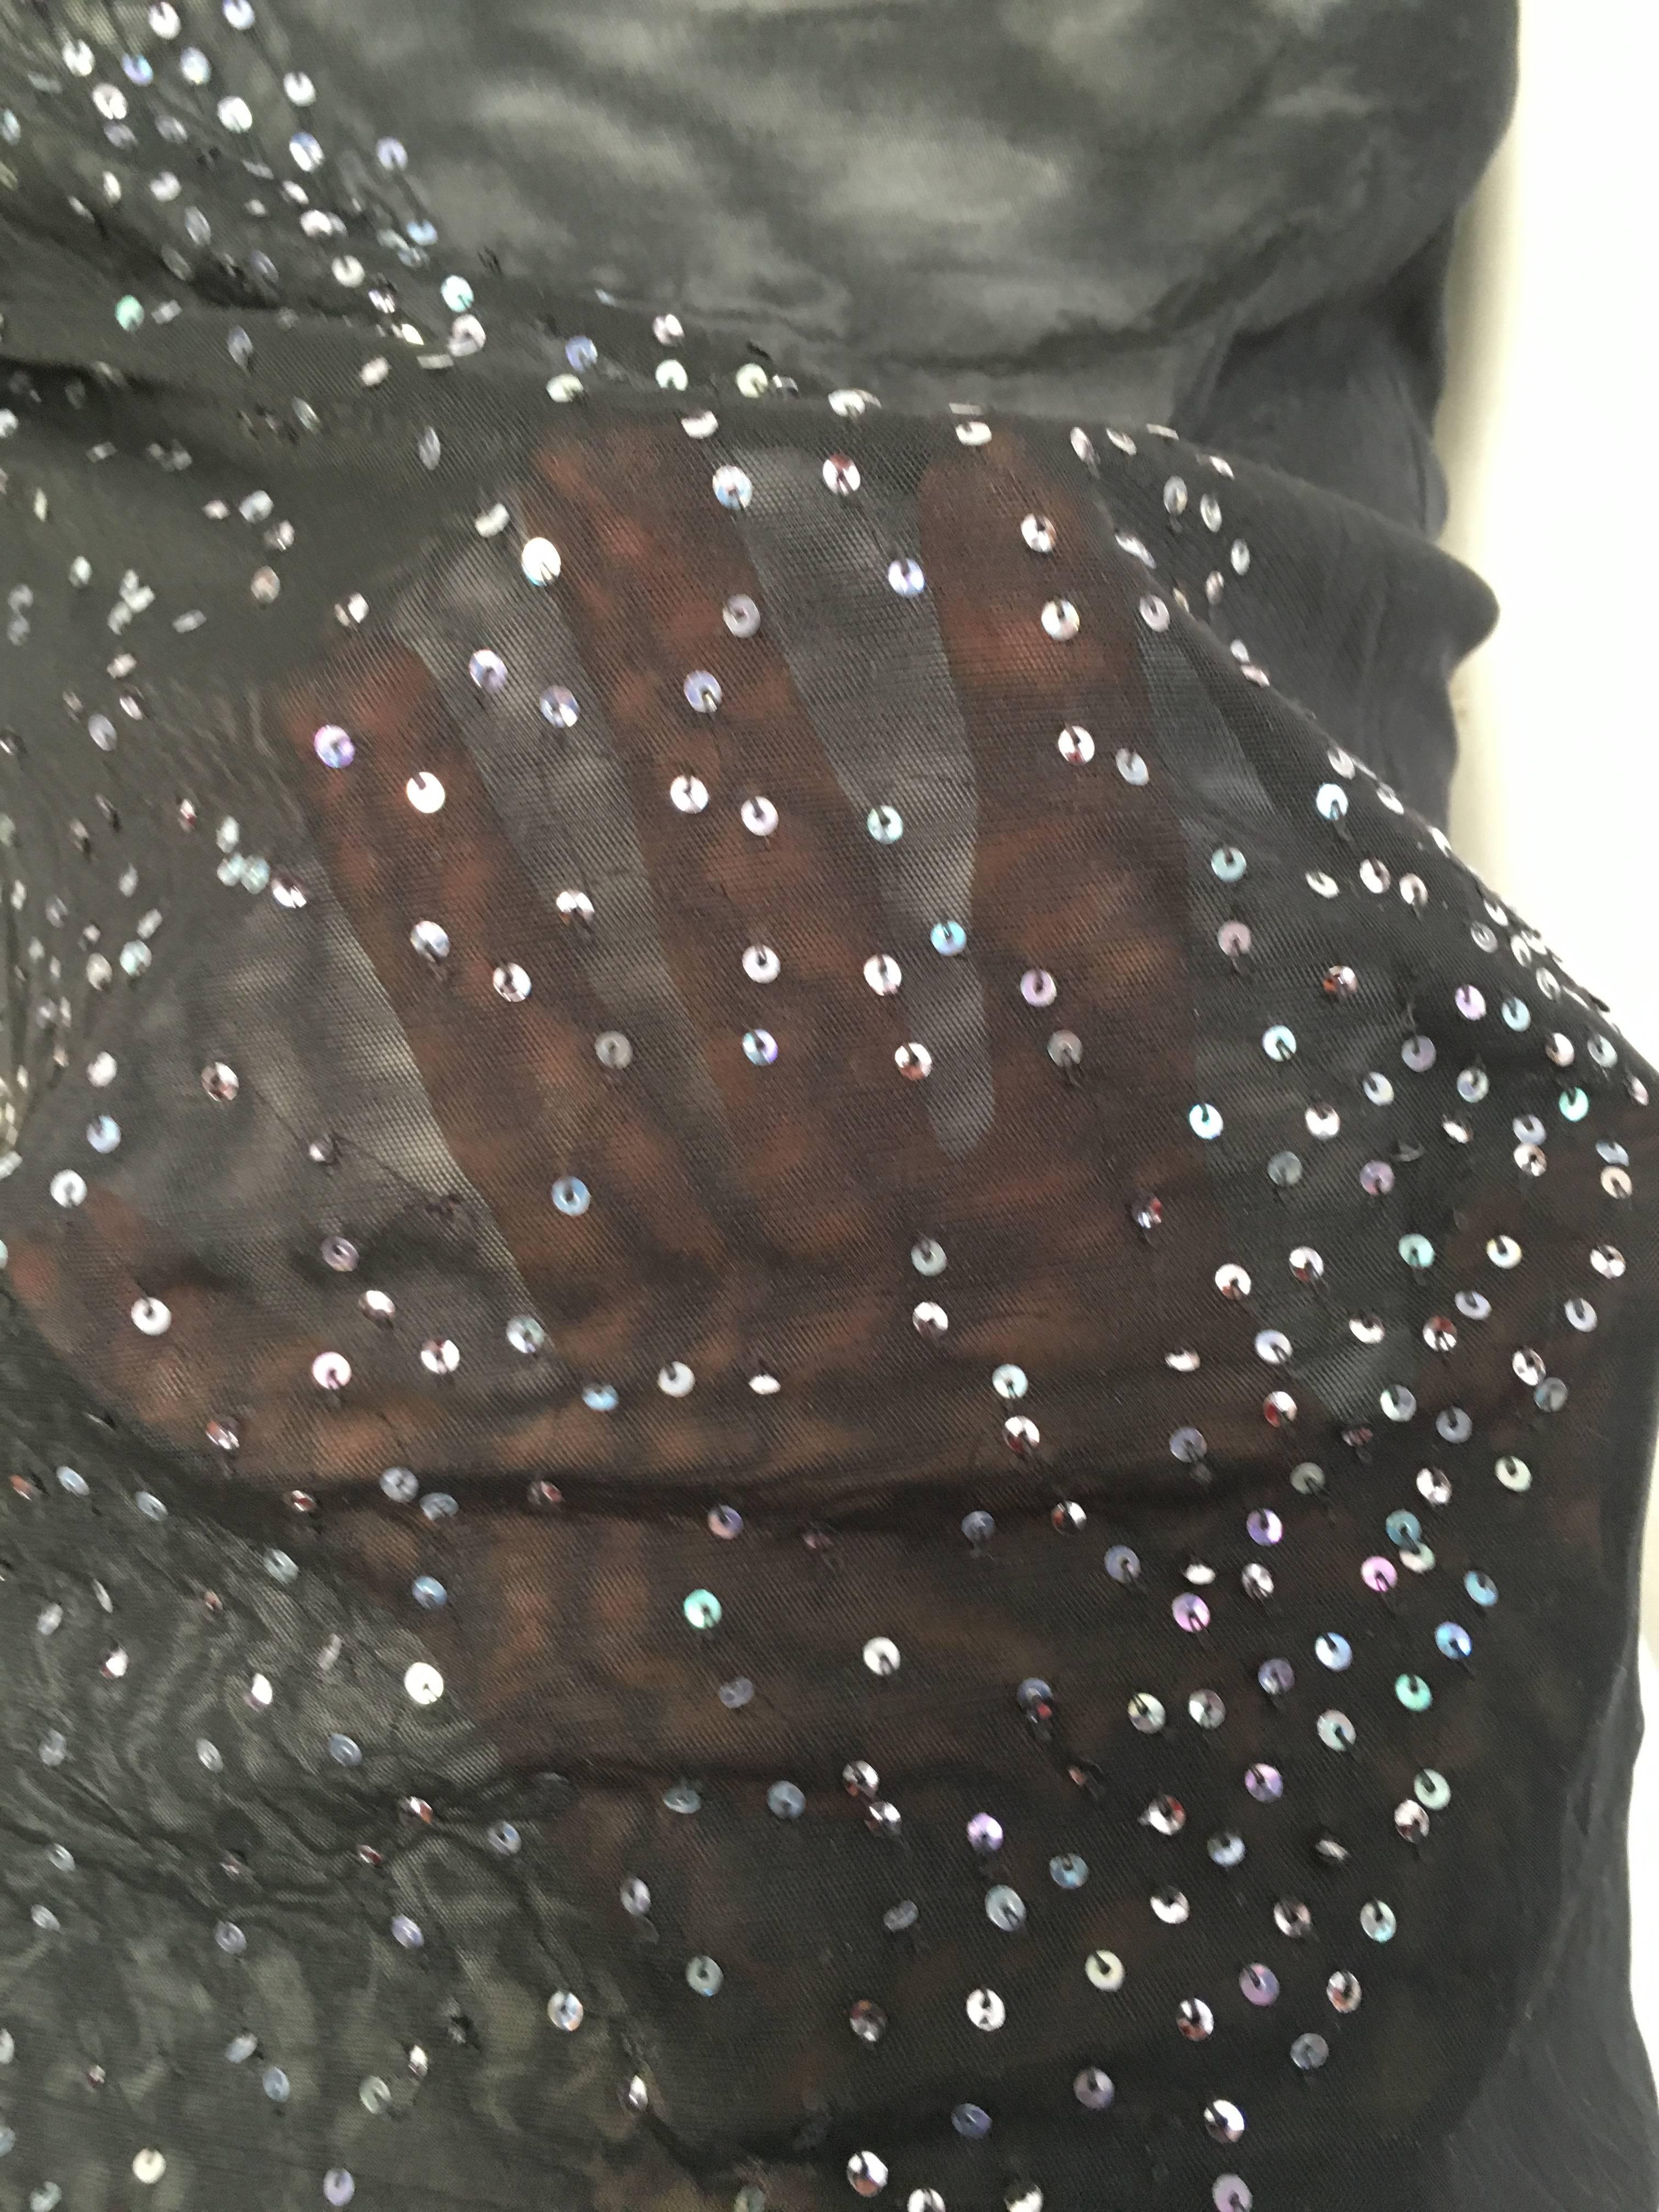 Narciso Rodriguez black sheer sleeveless sequin top is a size 6.  This sexy & contemporary sheer top is jaw dropping and would be perfect for any red carpet event. Why buy trends when the classics are so much better? 
Measurements are:
35